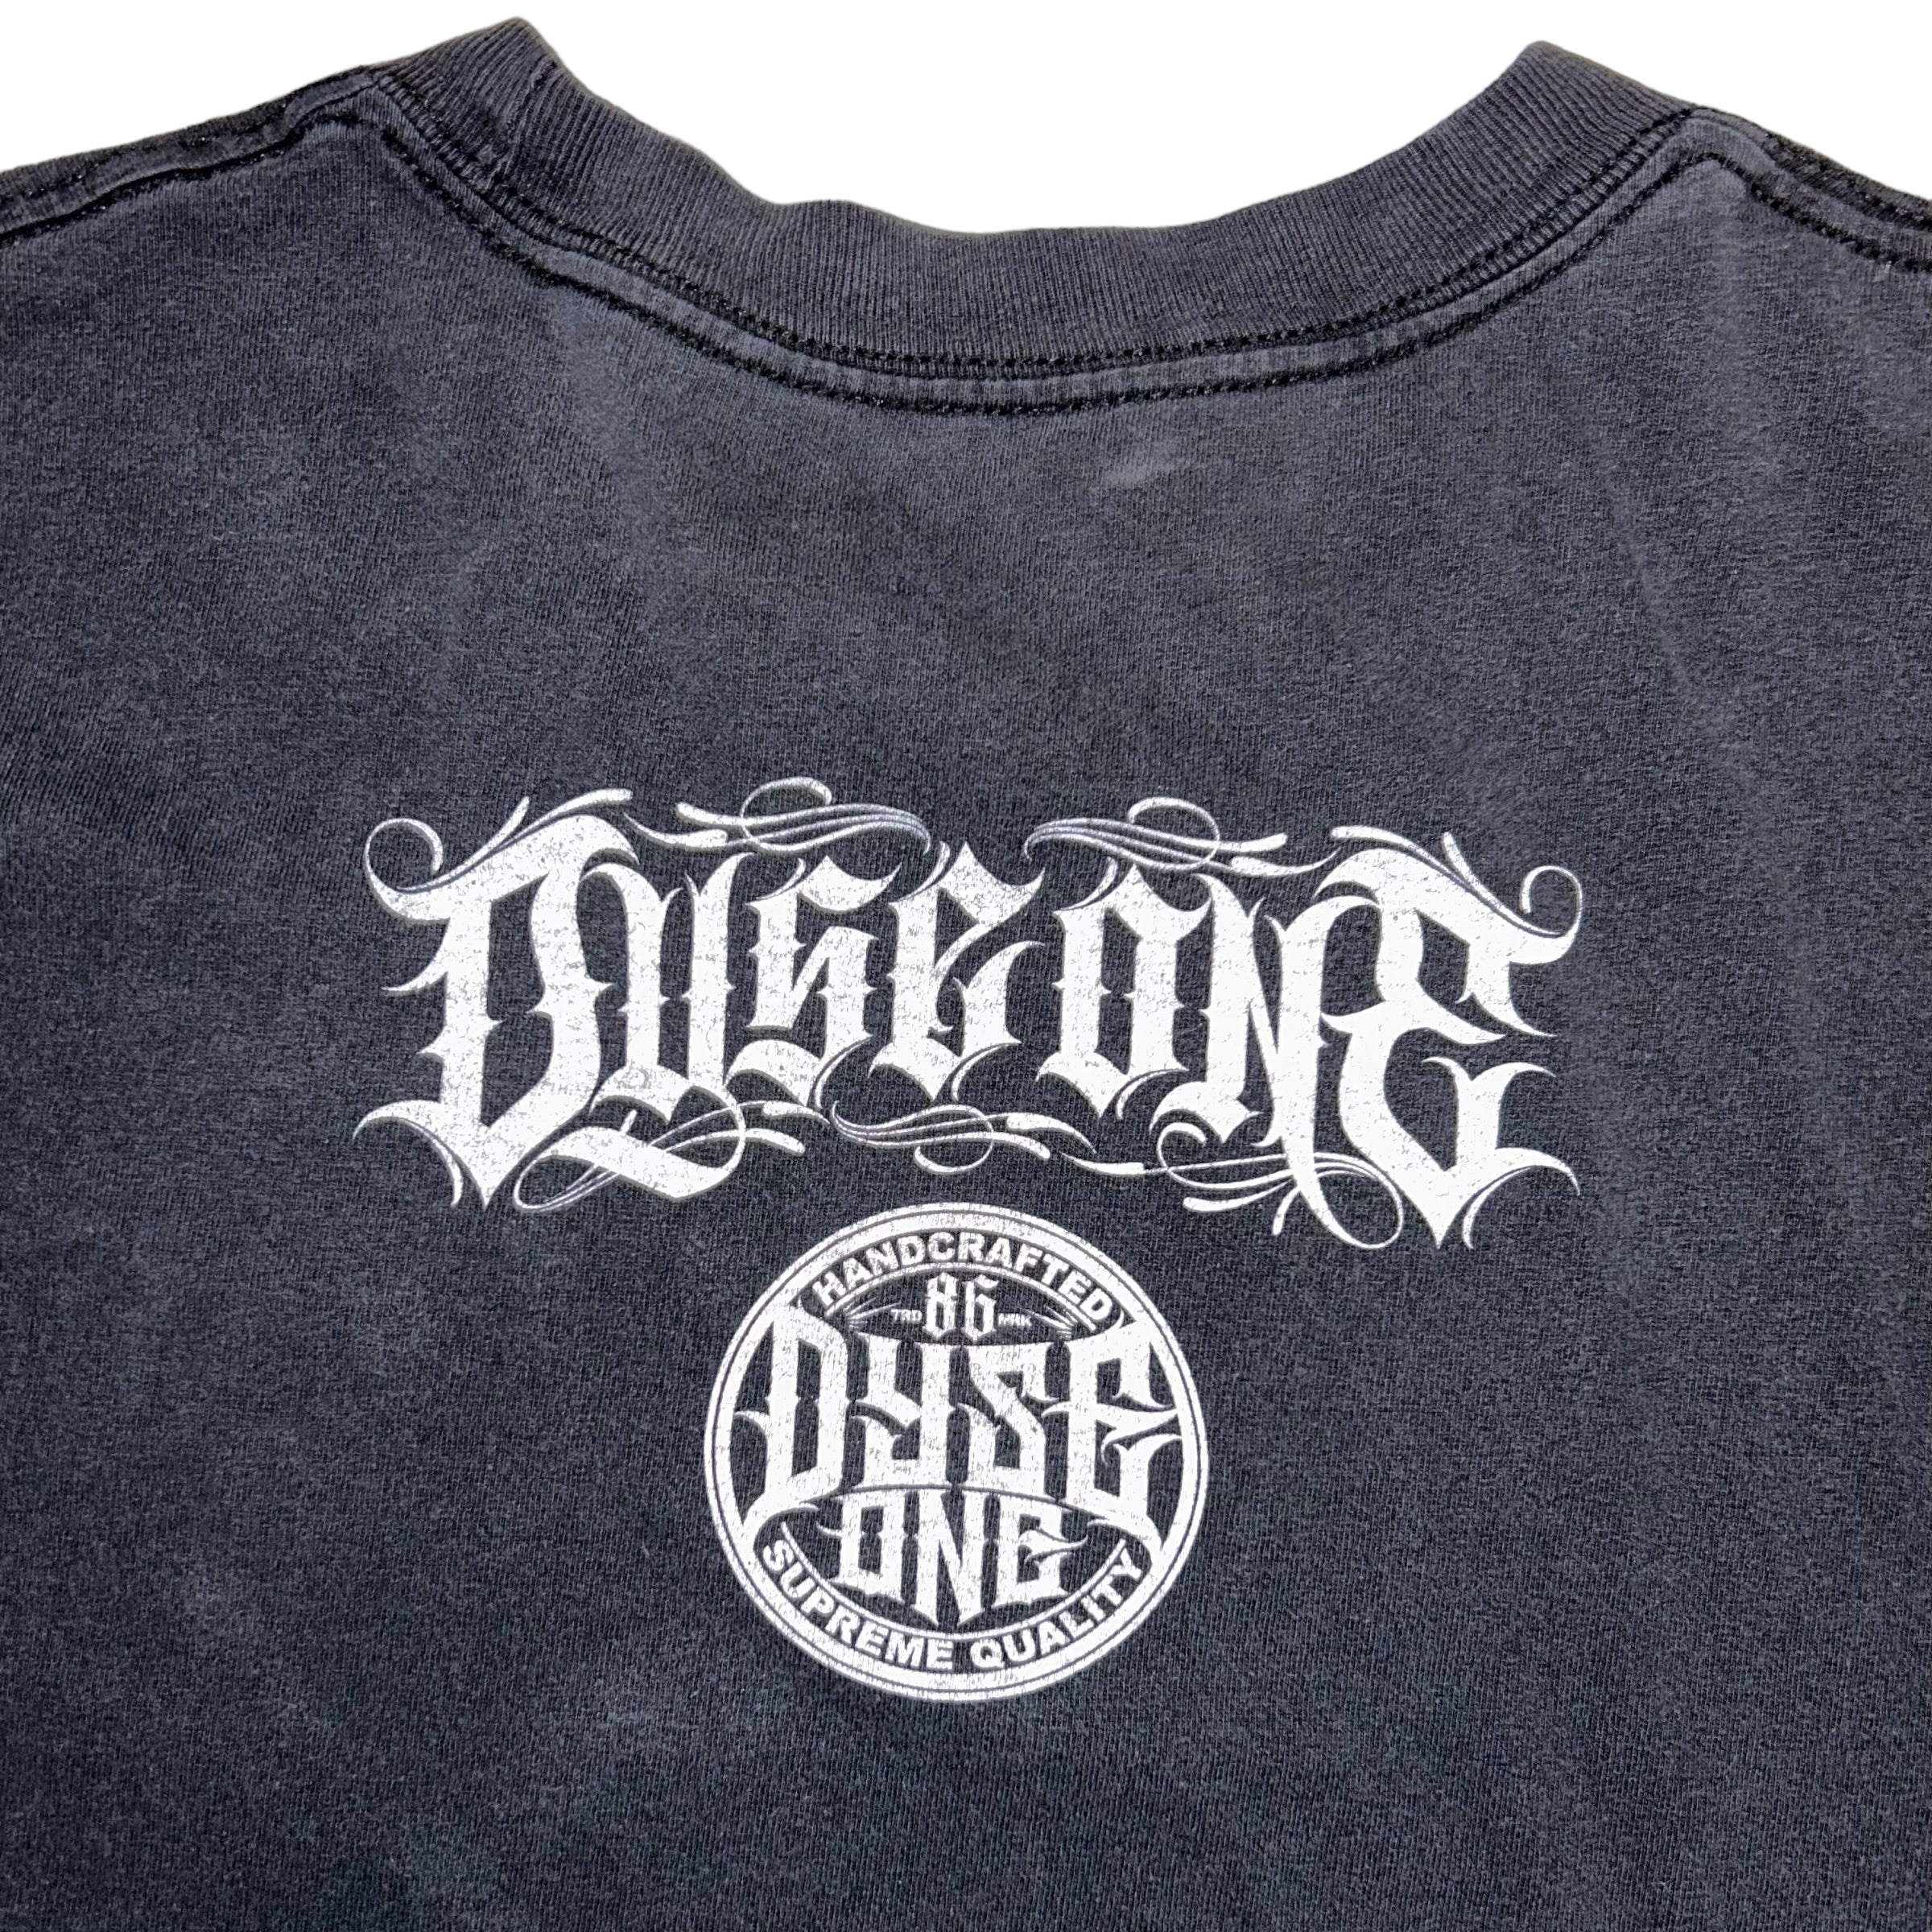 T-Shirt Dyse One (2XL)